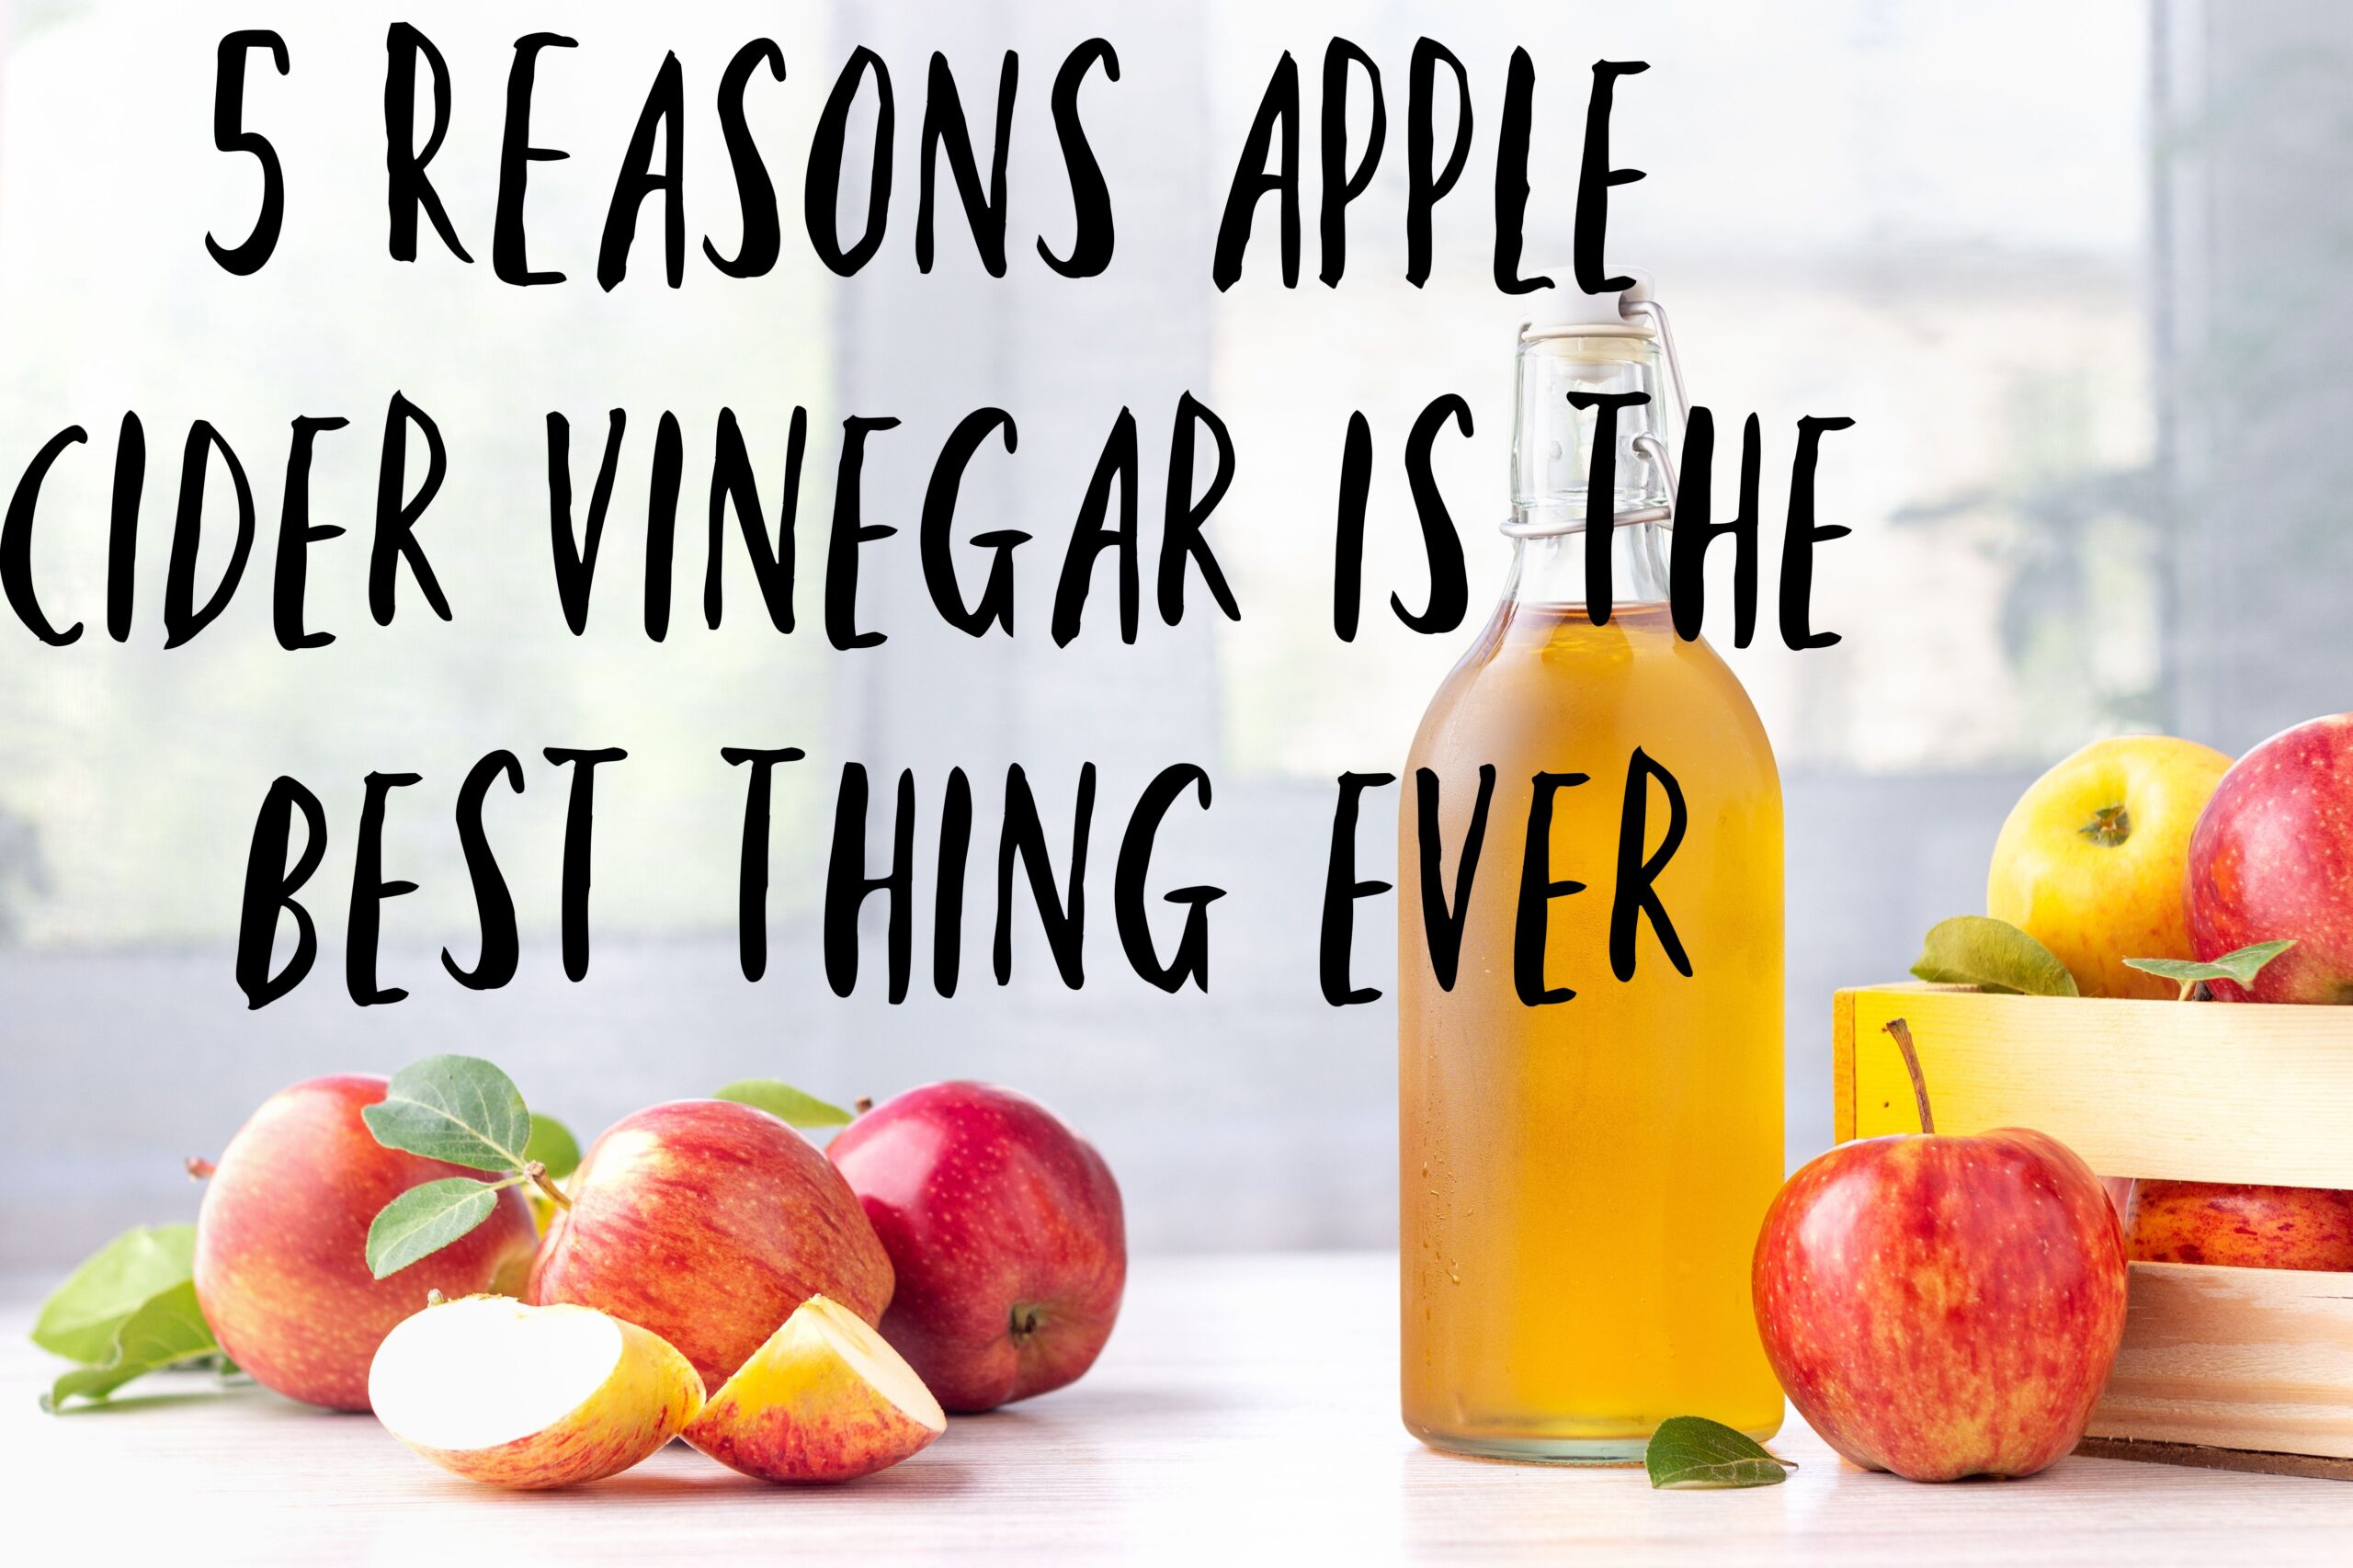 5 Undeniable Reasons Apple Cider Vinegar Is the Best Thing Ever [Video]